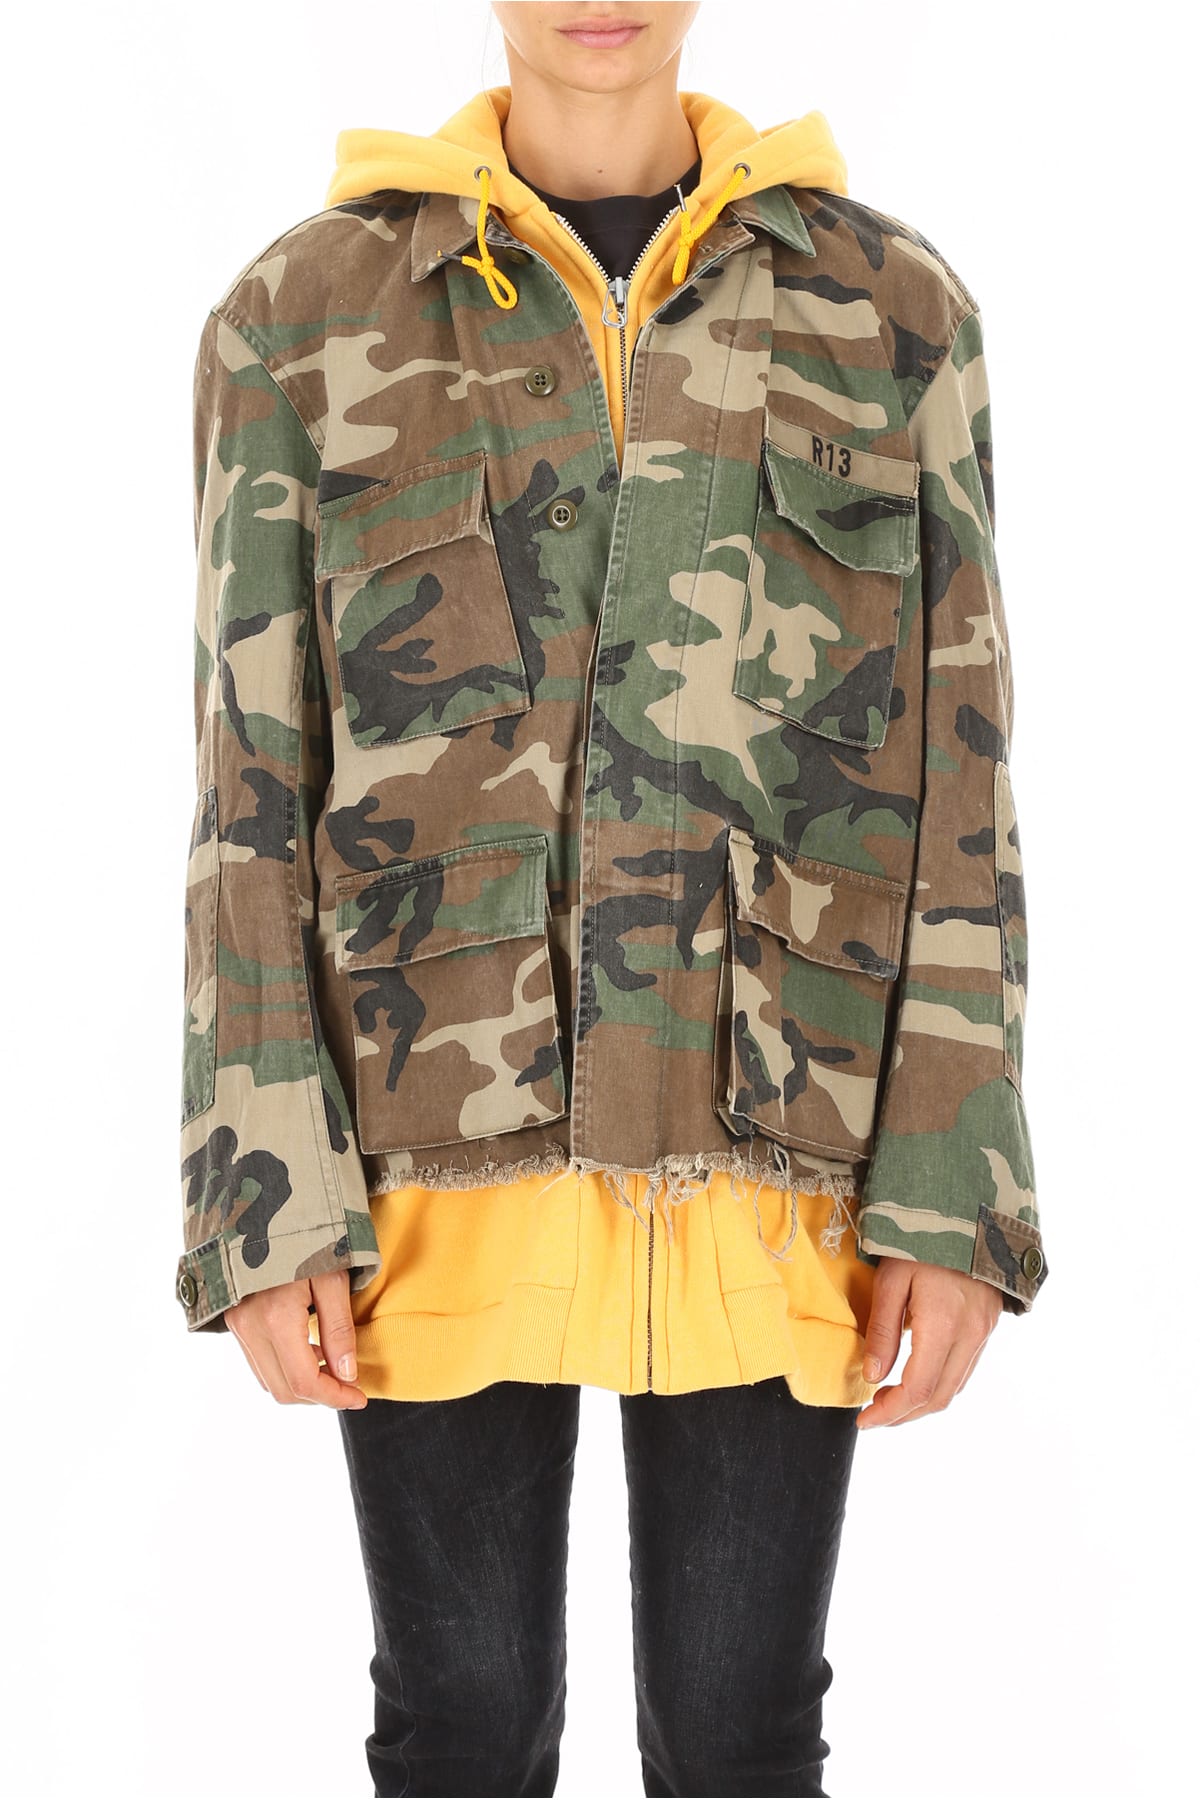 R13 R13 Camouflage Jacket With Hoodie - CAMO W YELLOW COMBO (Yellow ...